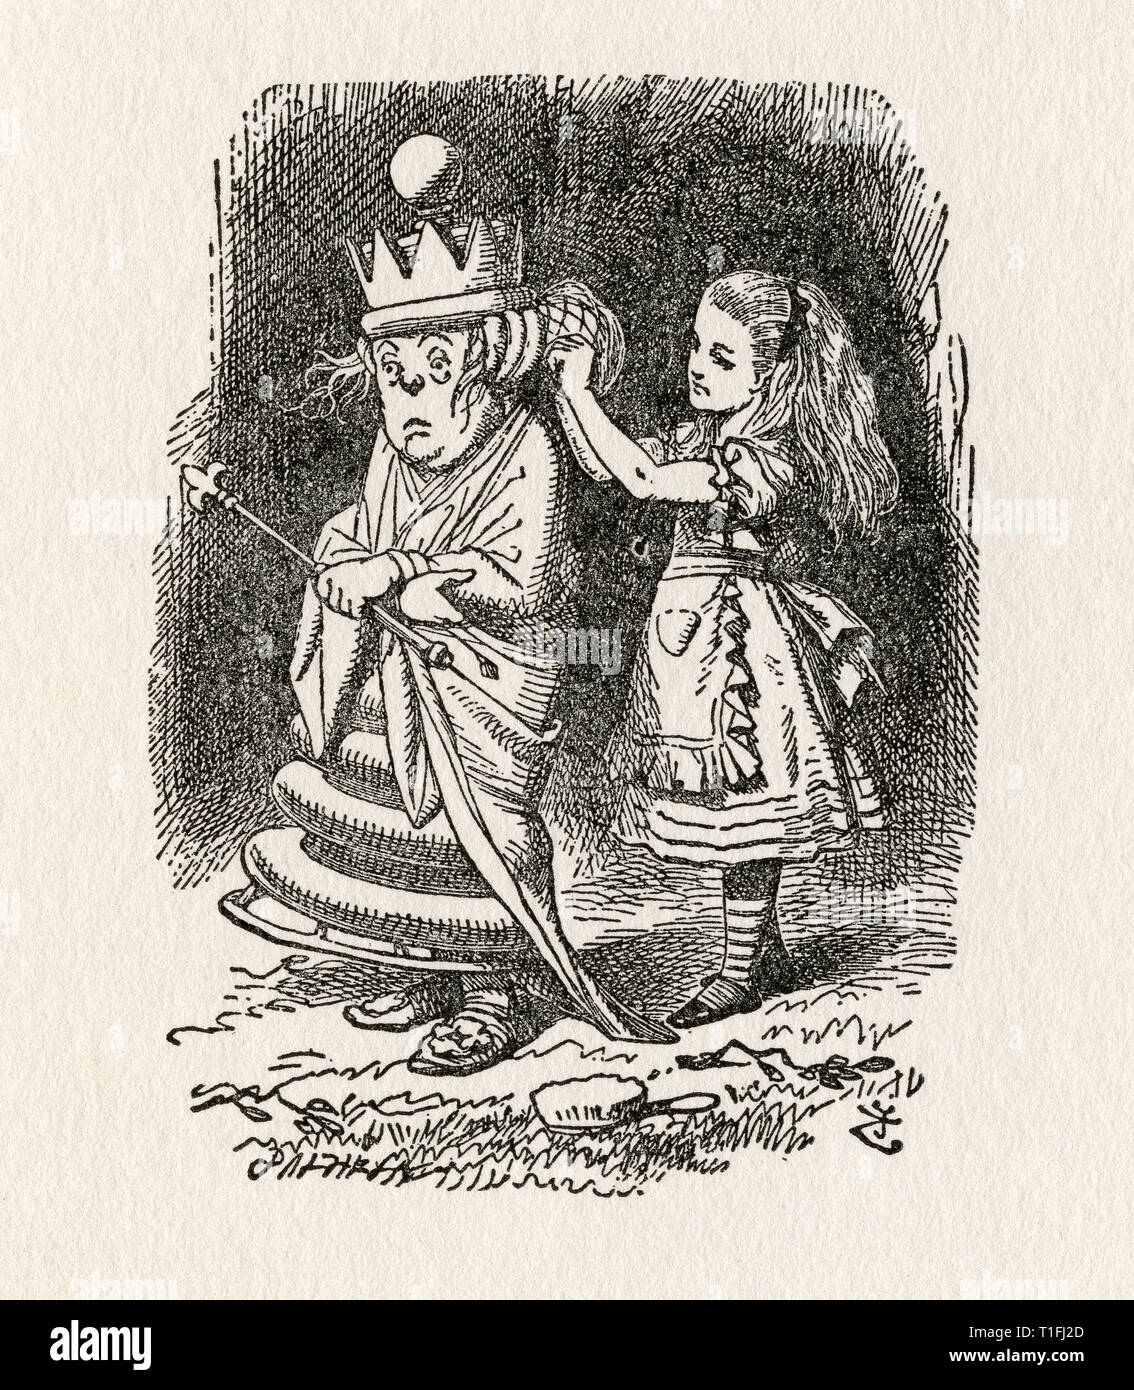 Alice and the White Queen.  Illustration by Sir John Tenniel, (1820 - 1914).  From the book Through the Looking Glass and What Alice Found There, by Lewis Carroll, published London, 1912. Stock Photo